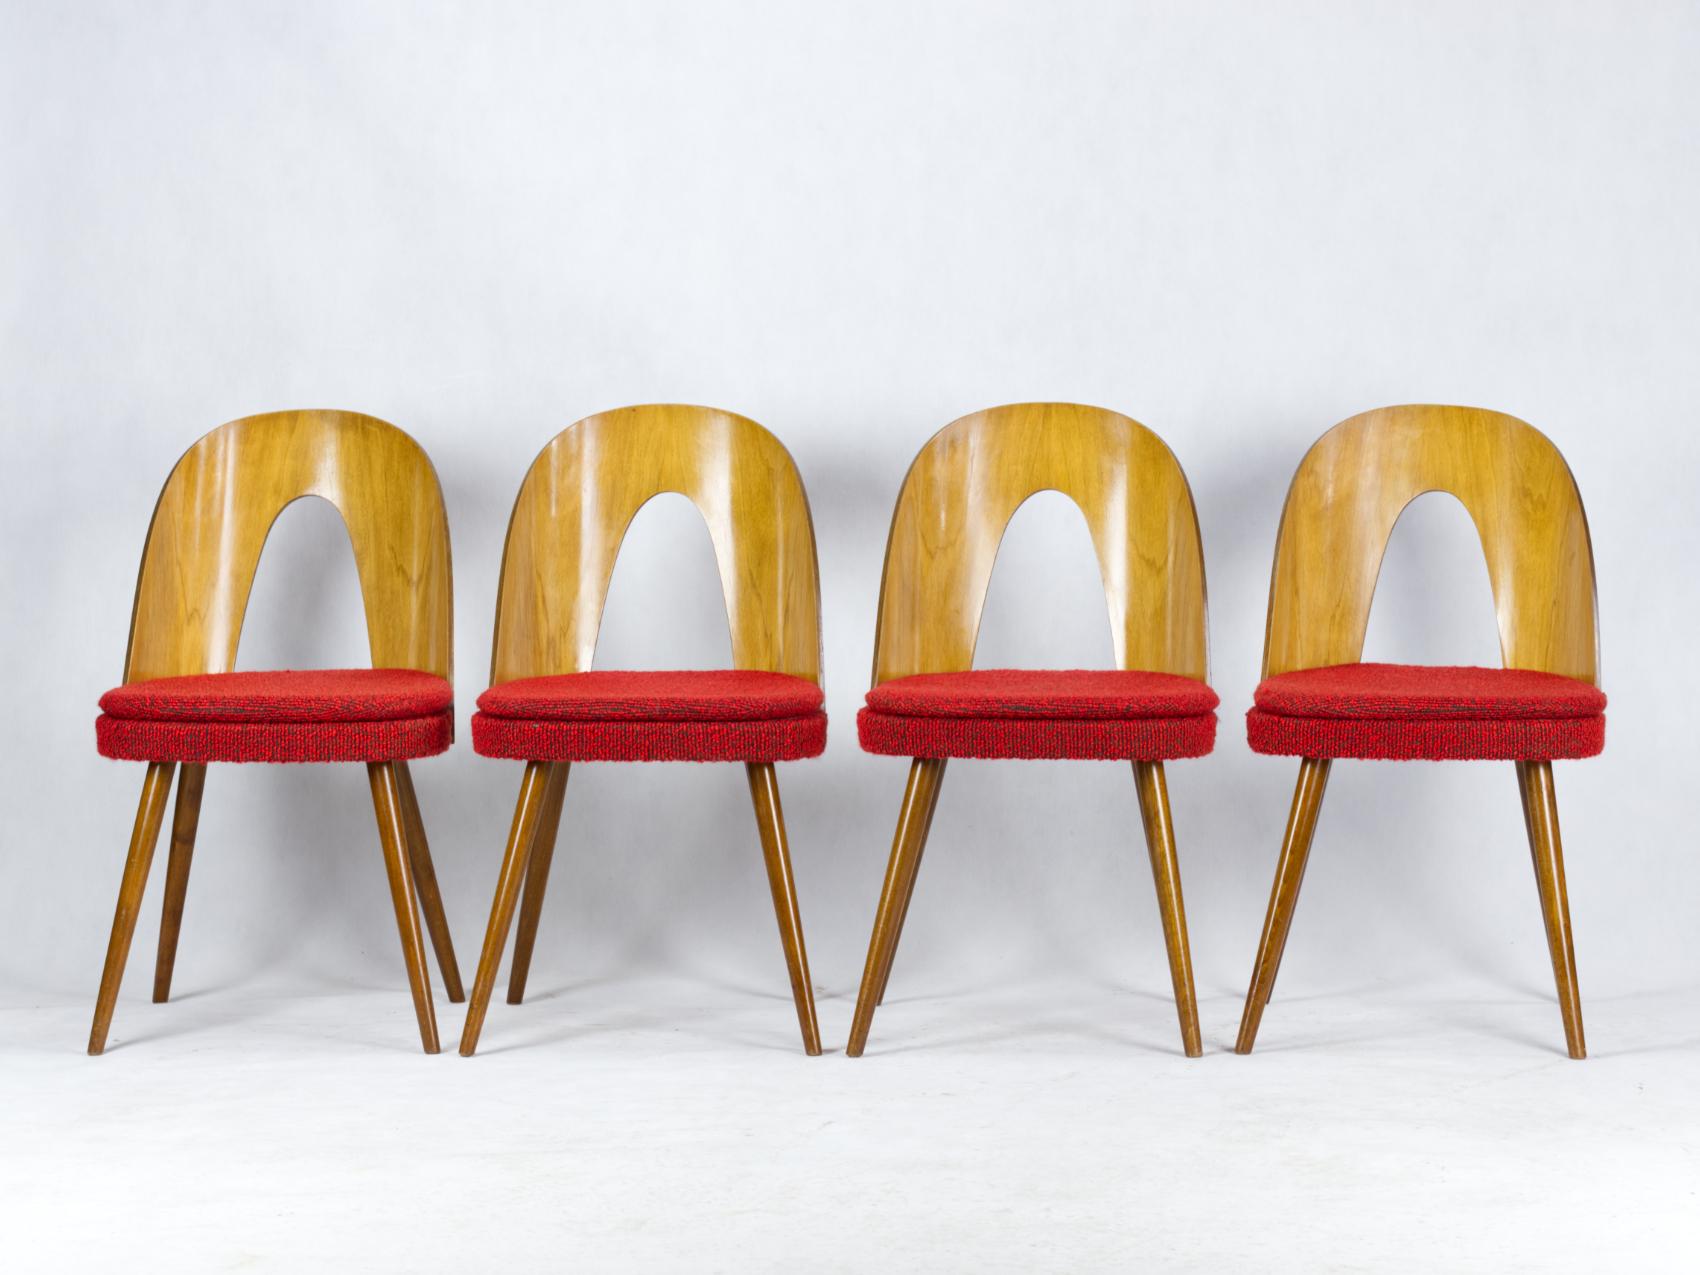 These chairs were designed by Antonin Šuman and were manufactured by the Tatra Nabytok Company, in the 1960s, in Czechoslovakia. Chairs in good vintage condition.